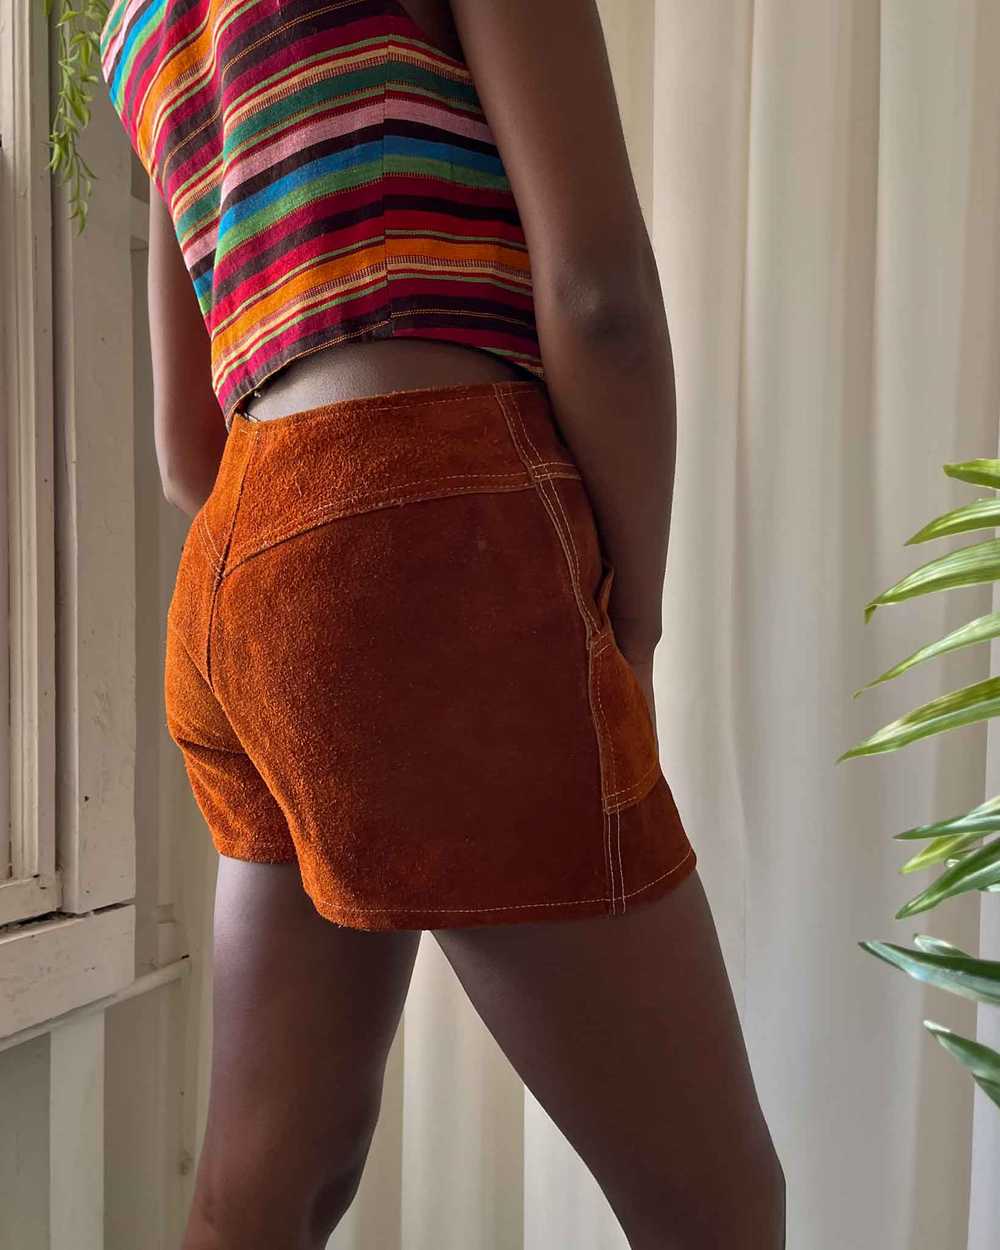 60s Suede Hot Shorts - image 3